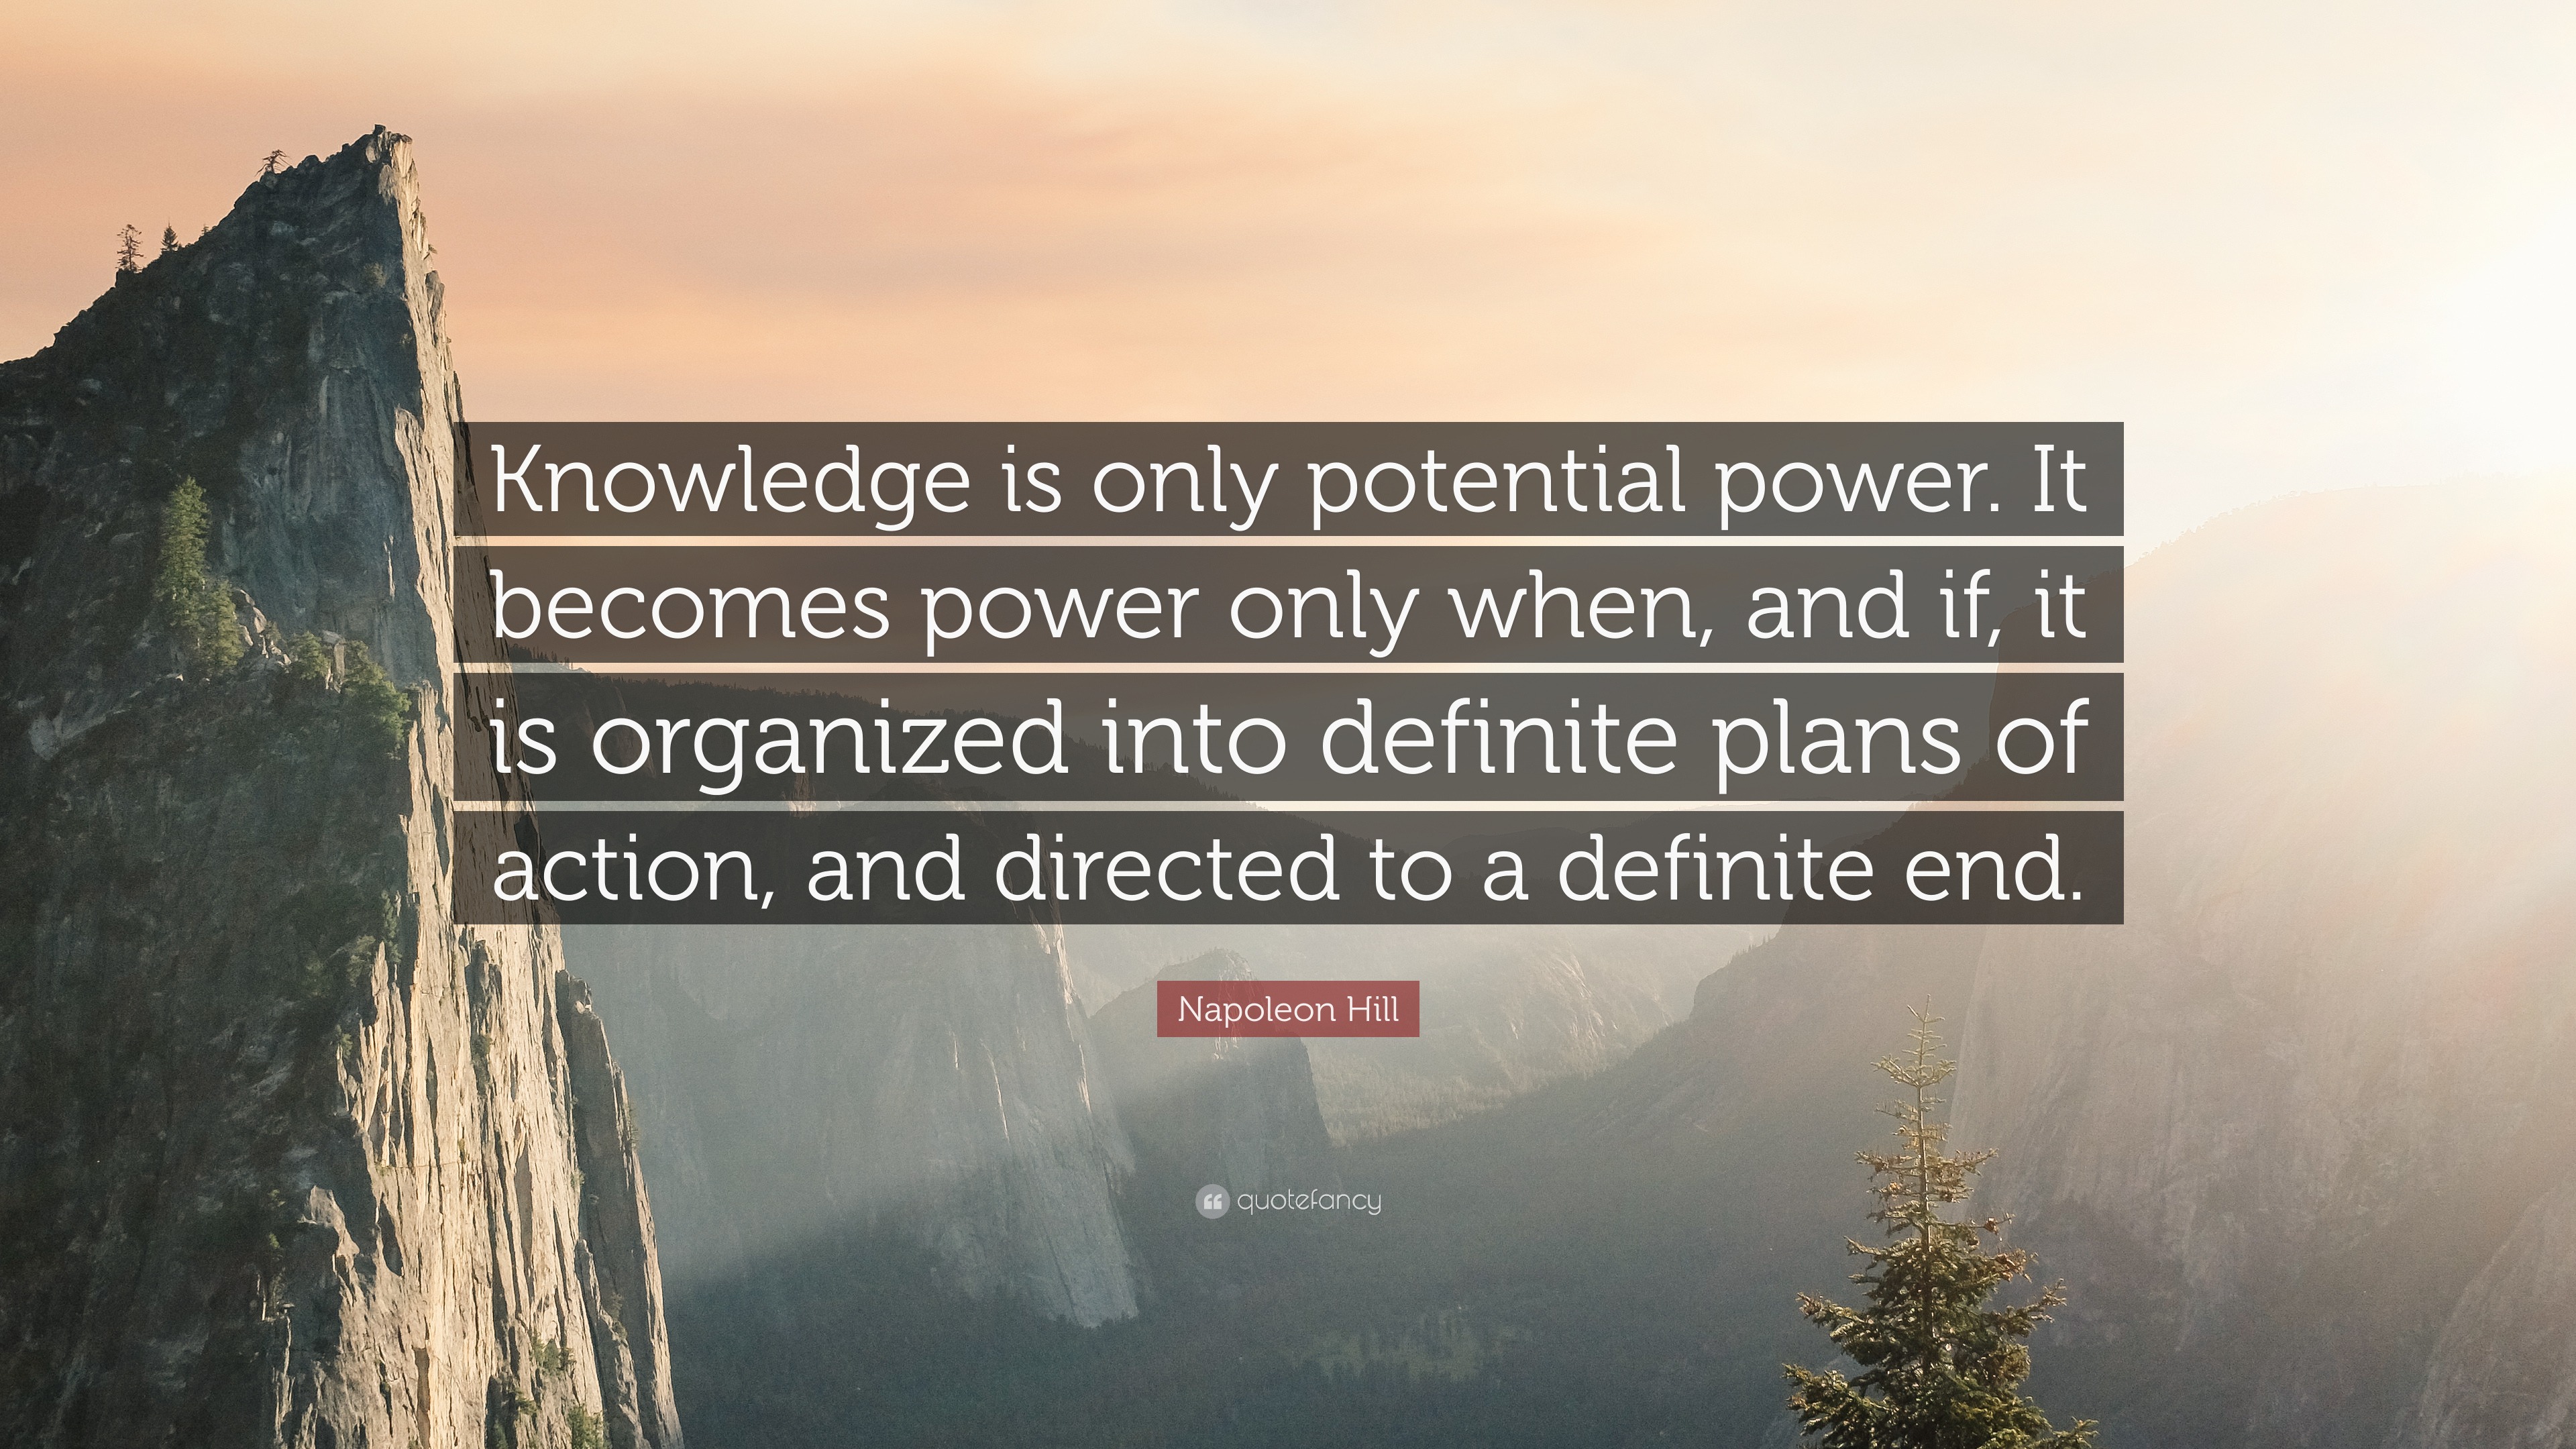 It becomes power only when, and if, it is organized into definite plans of ...